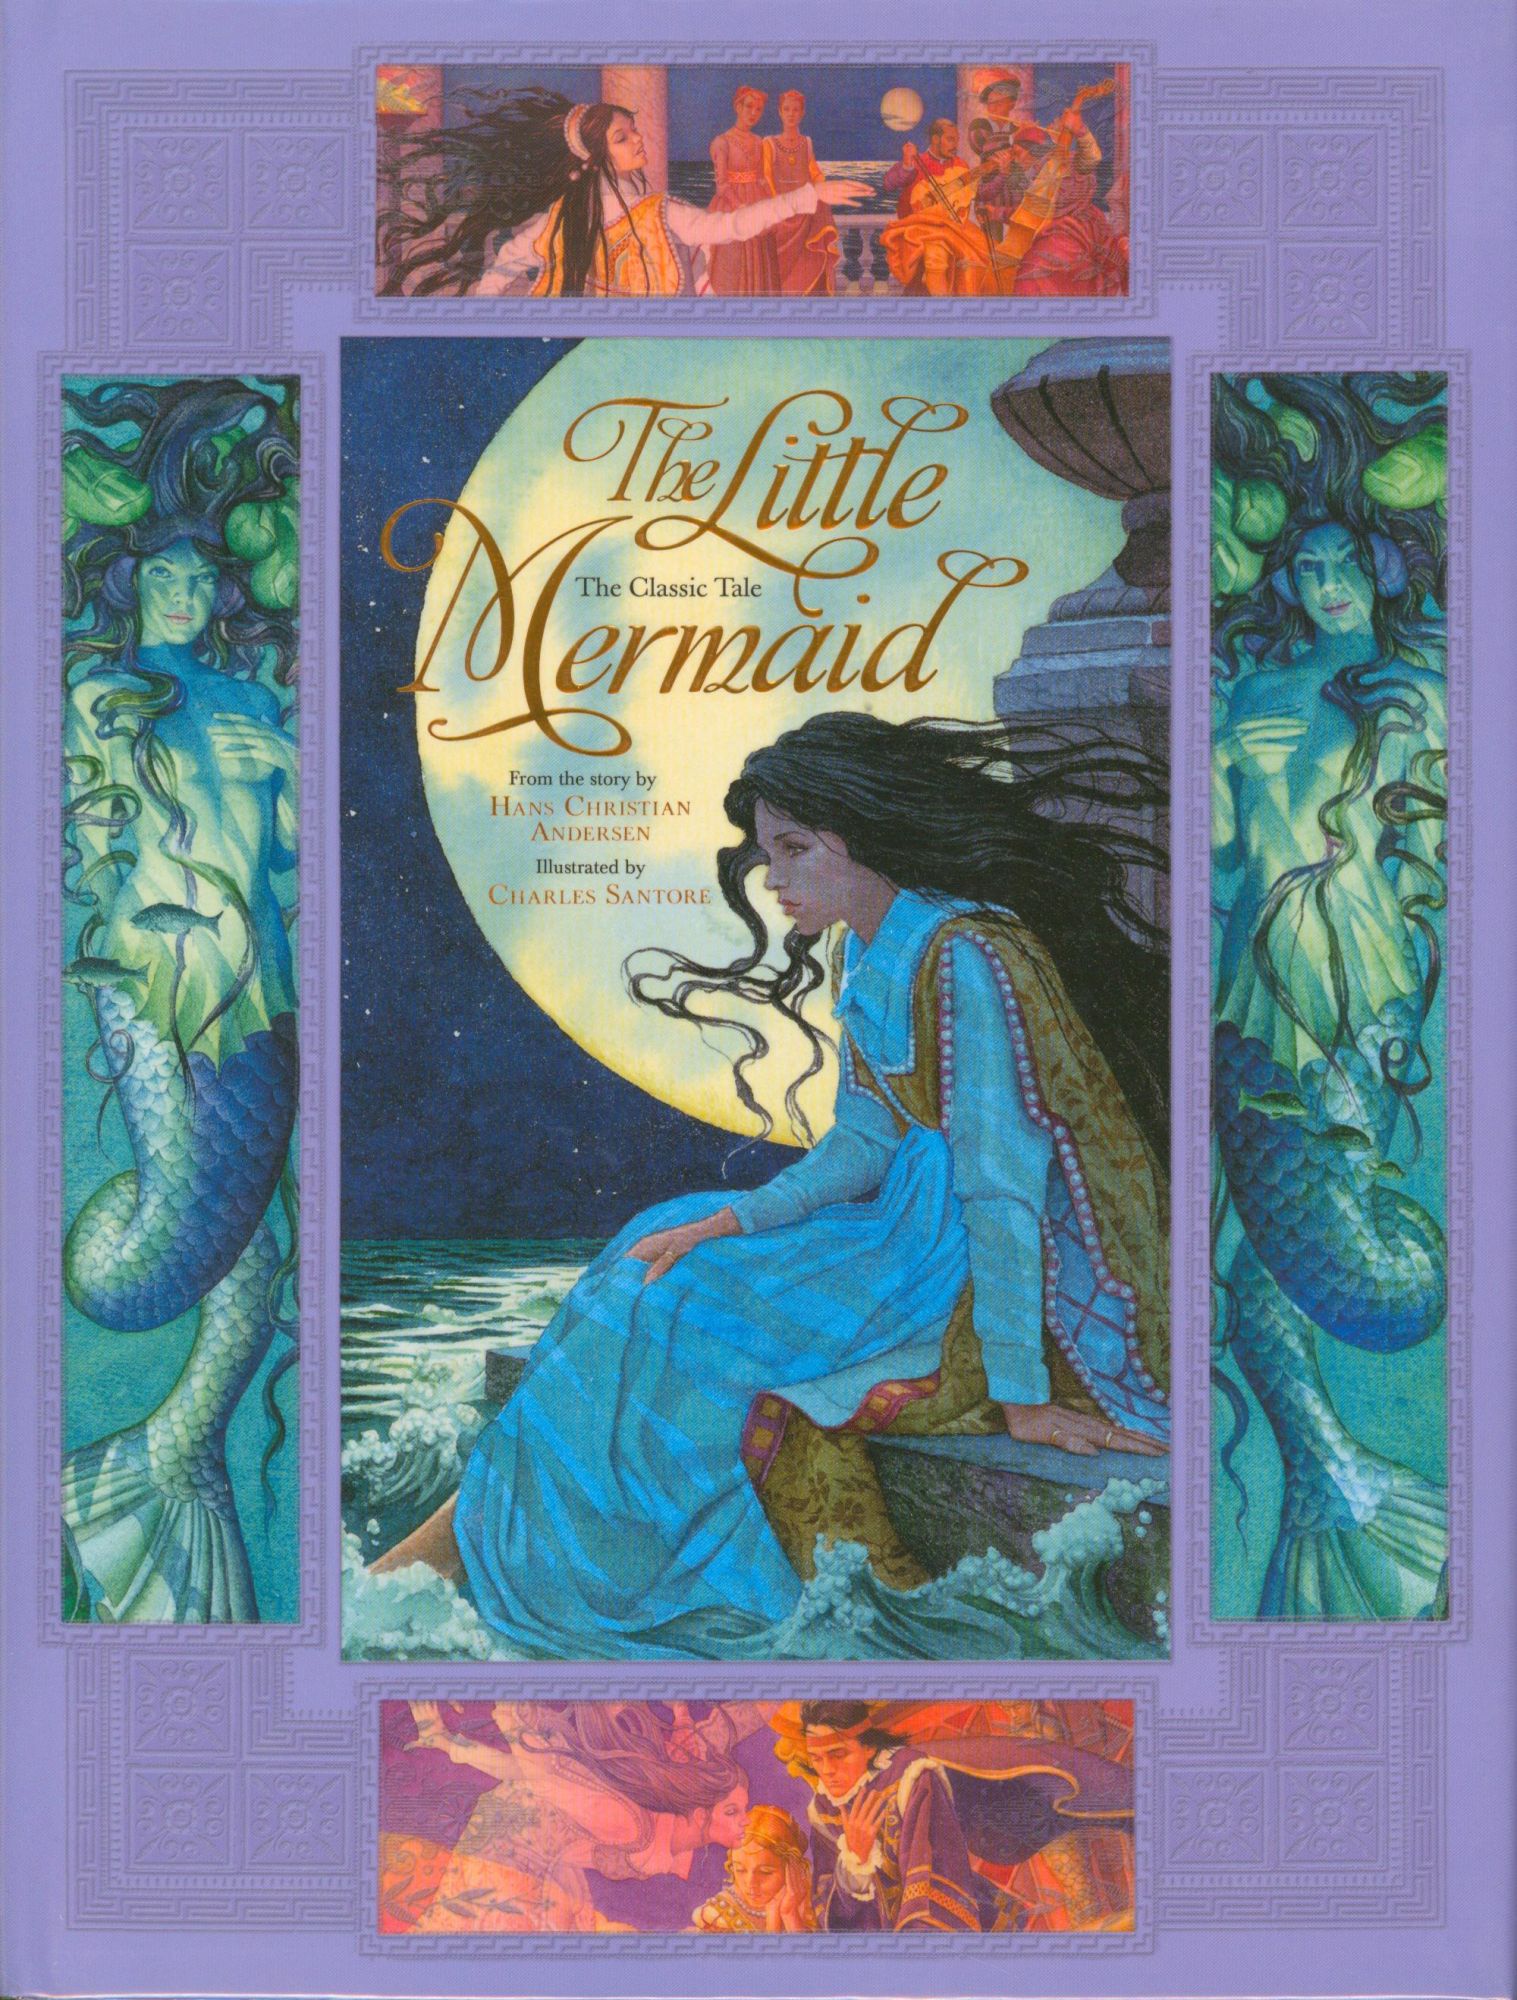 The Little Mermaid - The Classic Tale - Andersen, Hans Christian